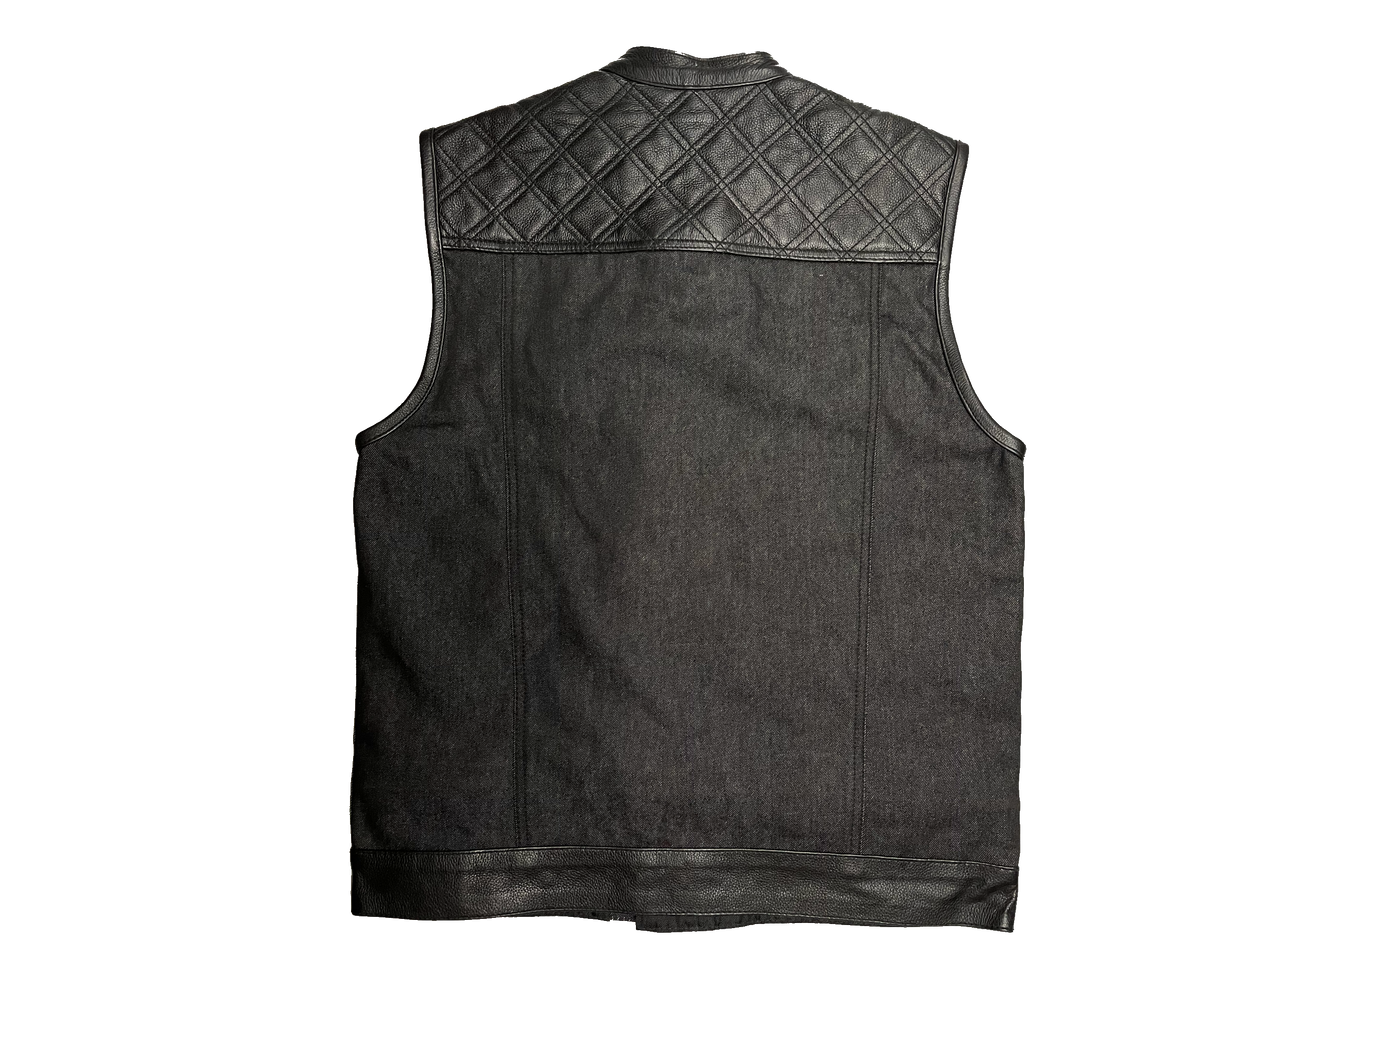 Premium black leather/denim club style vest with DIAMOND STITCHING. The lining is black paisley pattern. Vest is made from premium naked cowhide leather and denim. It has a tab style collar and front snap closure. It has a solid panel back.  Available for purchase in our shop in Smyrna, TN outside of Nashville. 